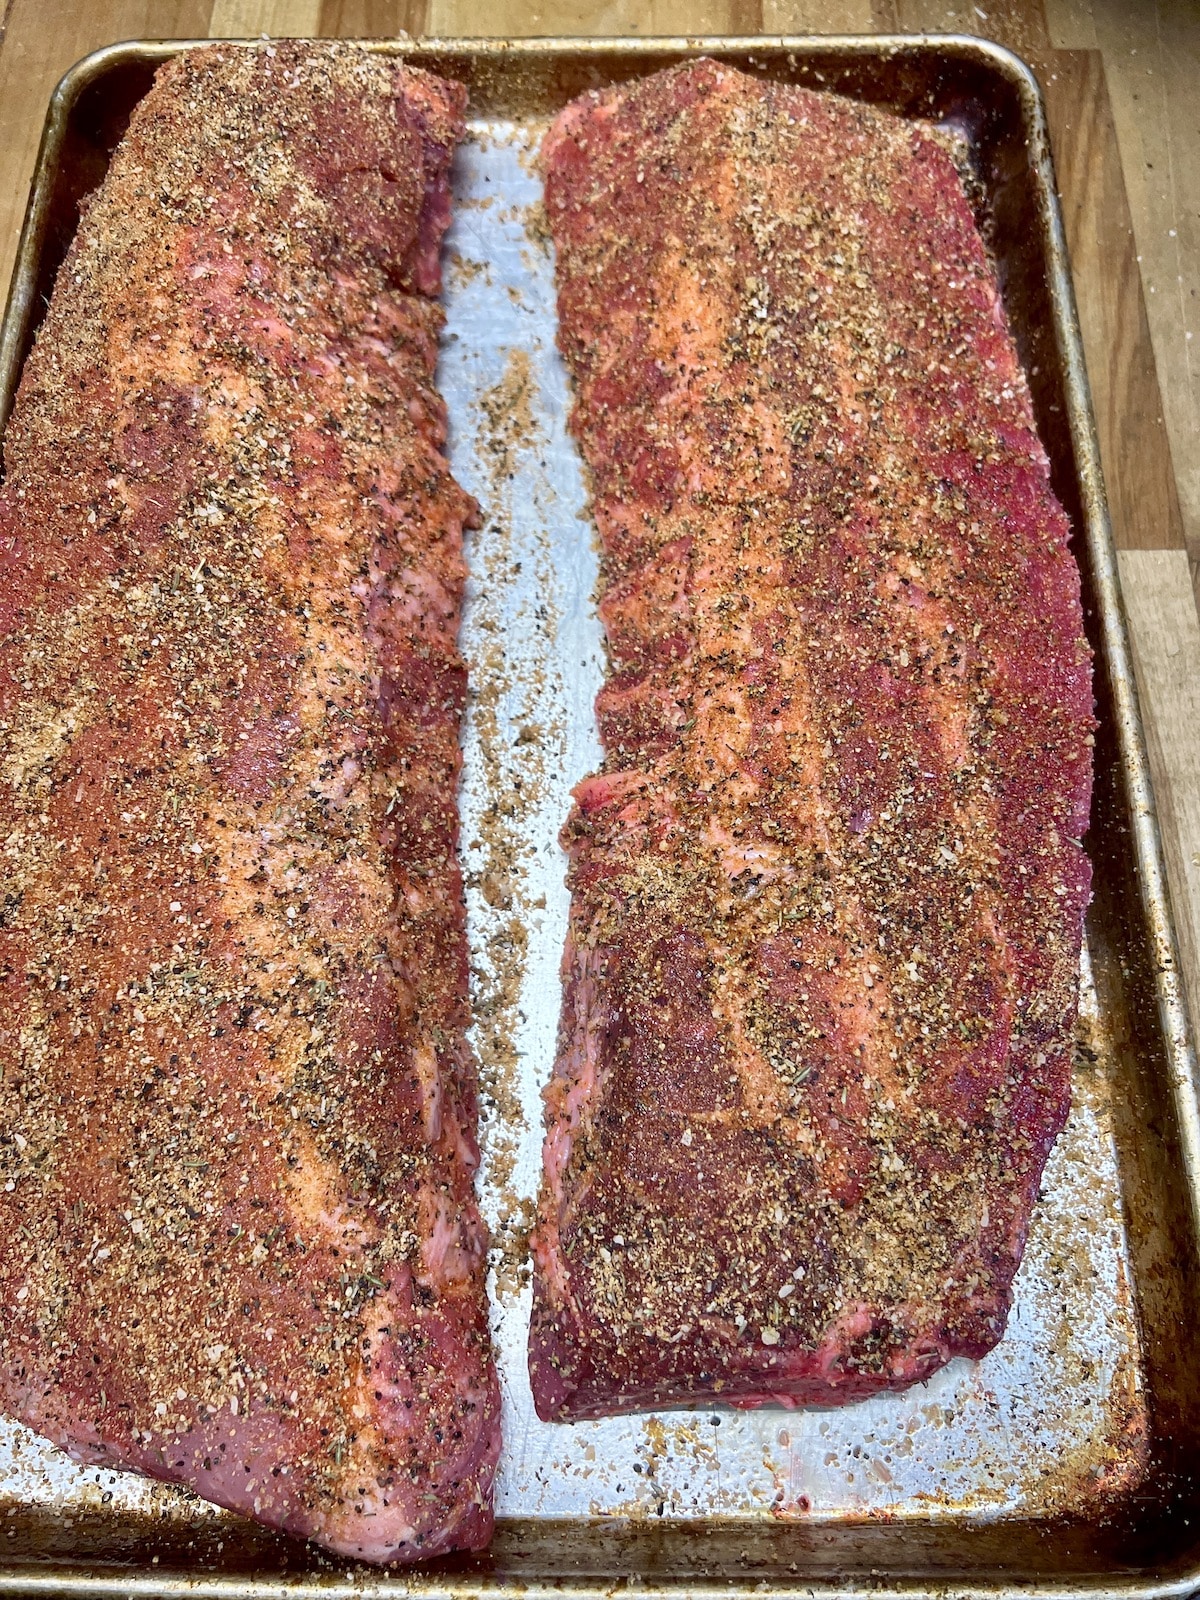 Dry rubbed baby back ribs on a sheet pan.